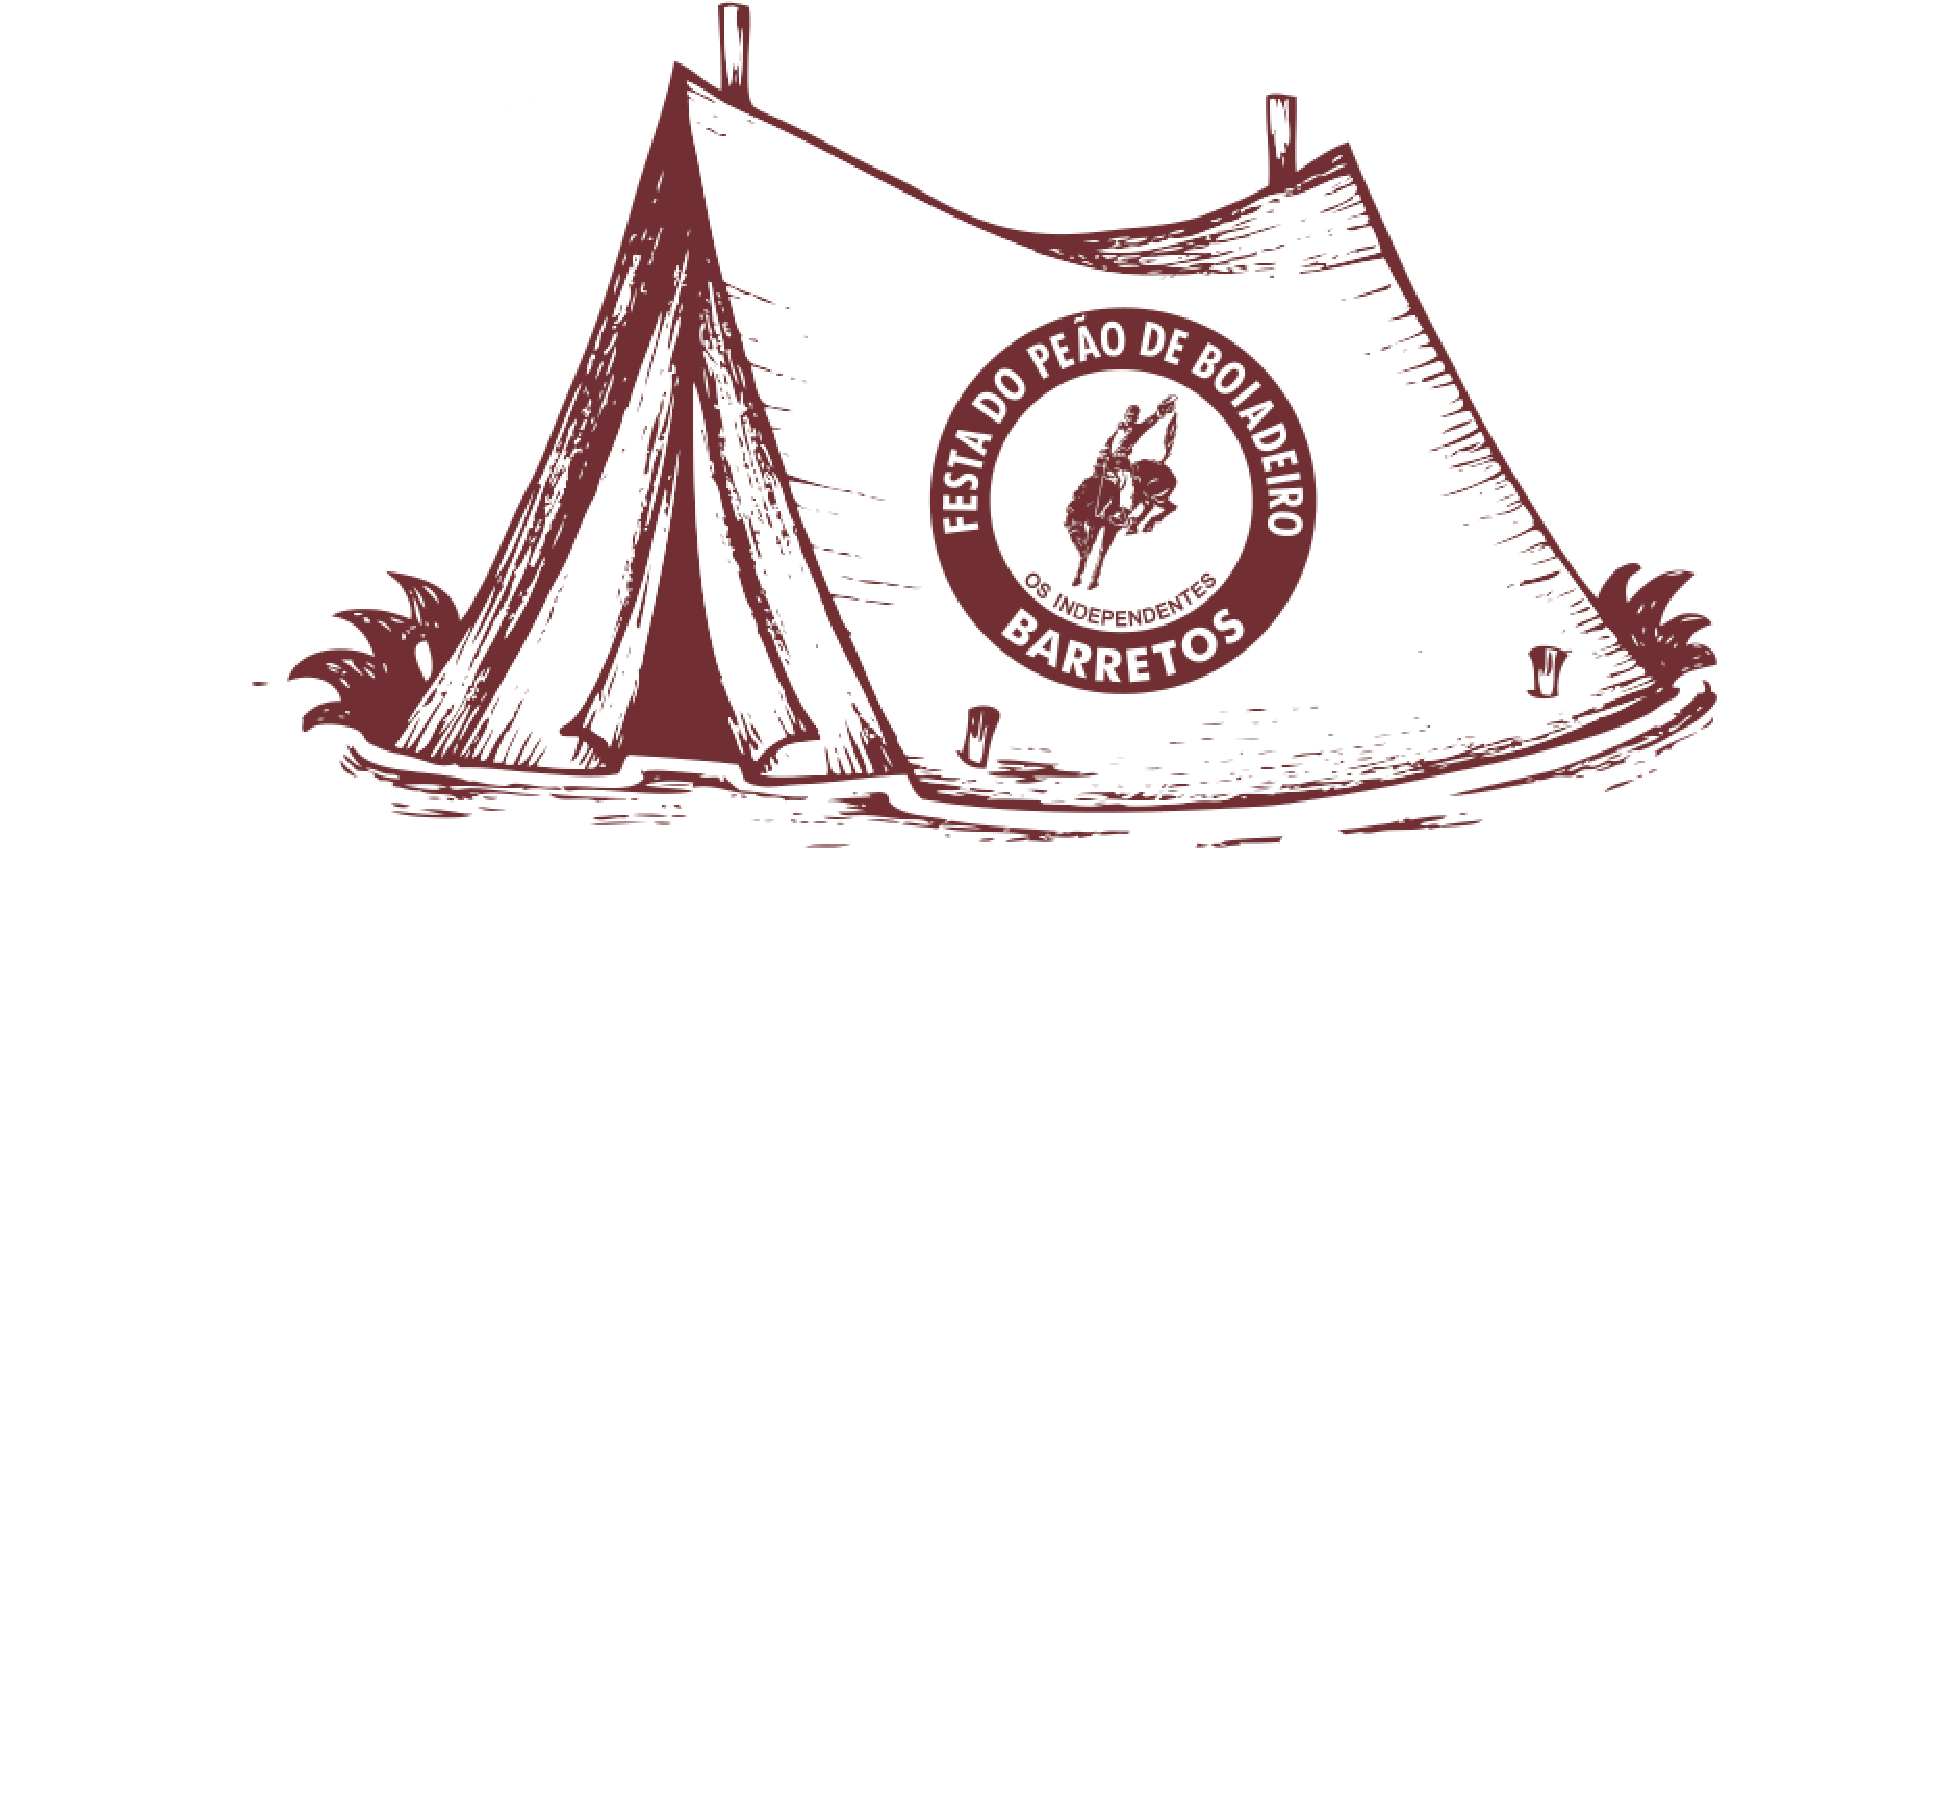 Camping Independentes